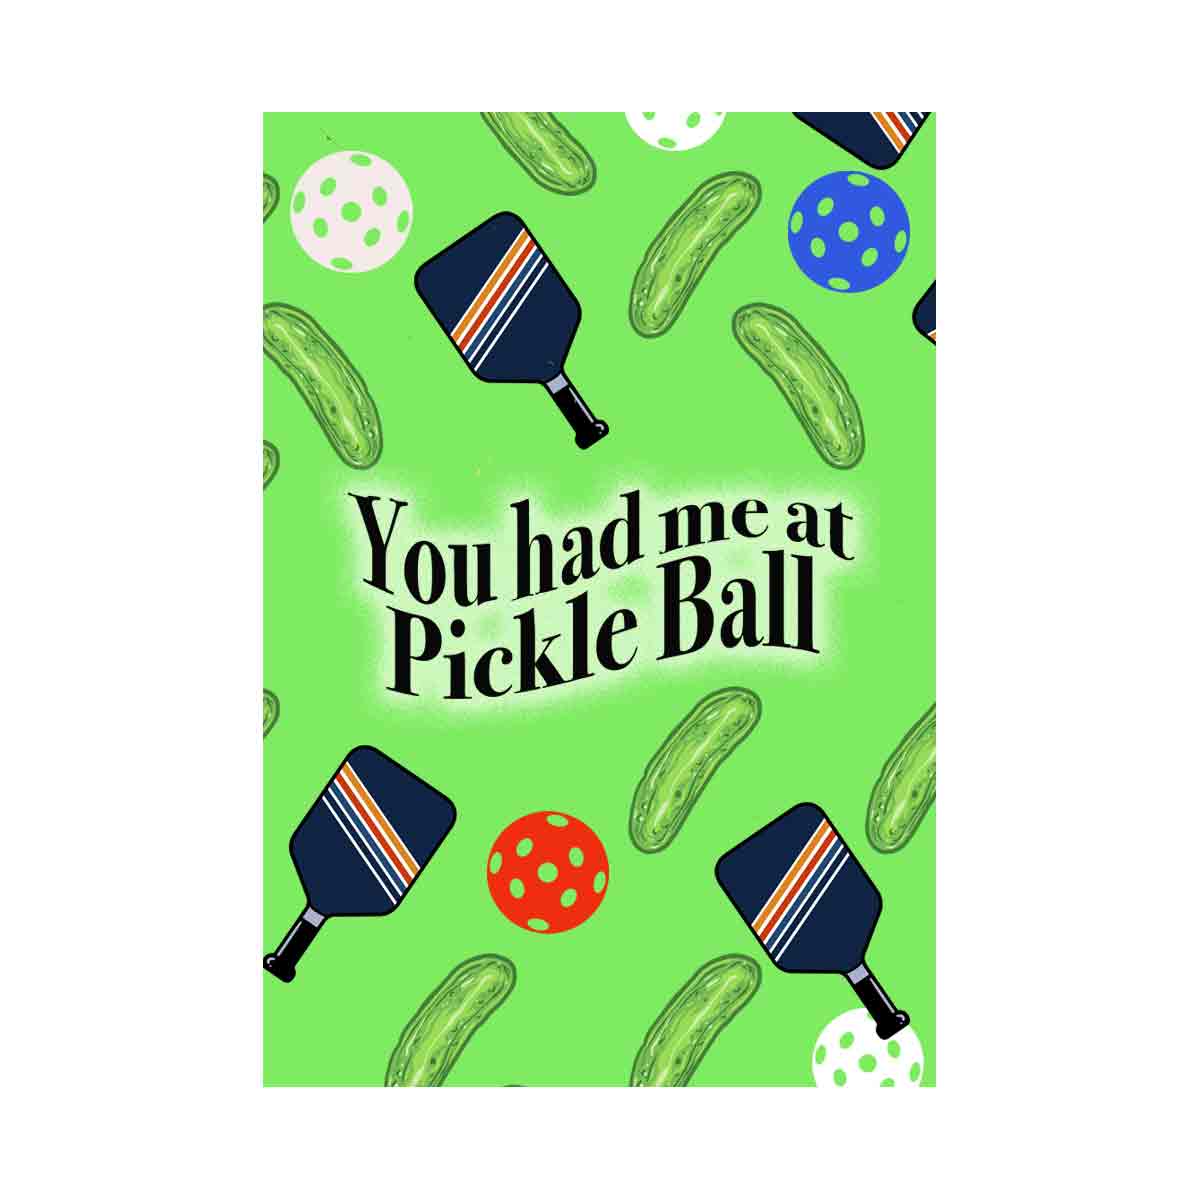 You had me at pickle ball - green